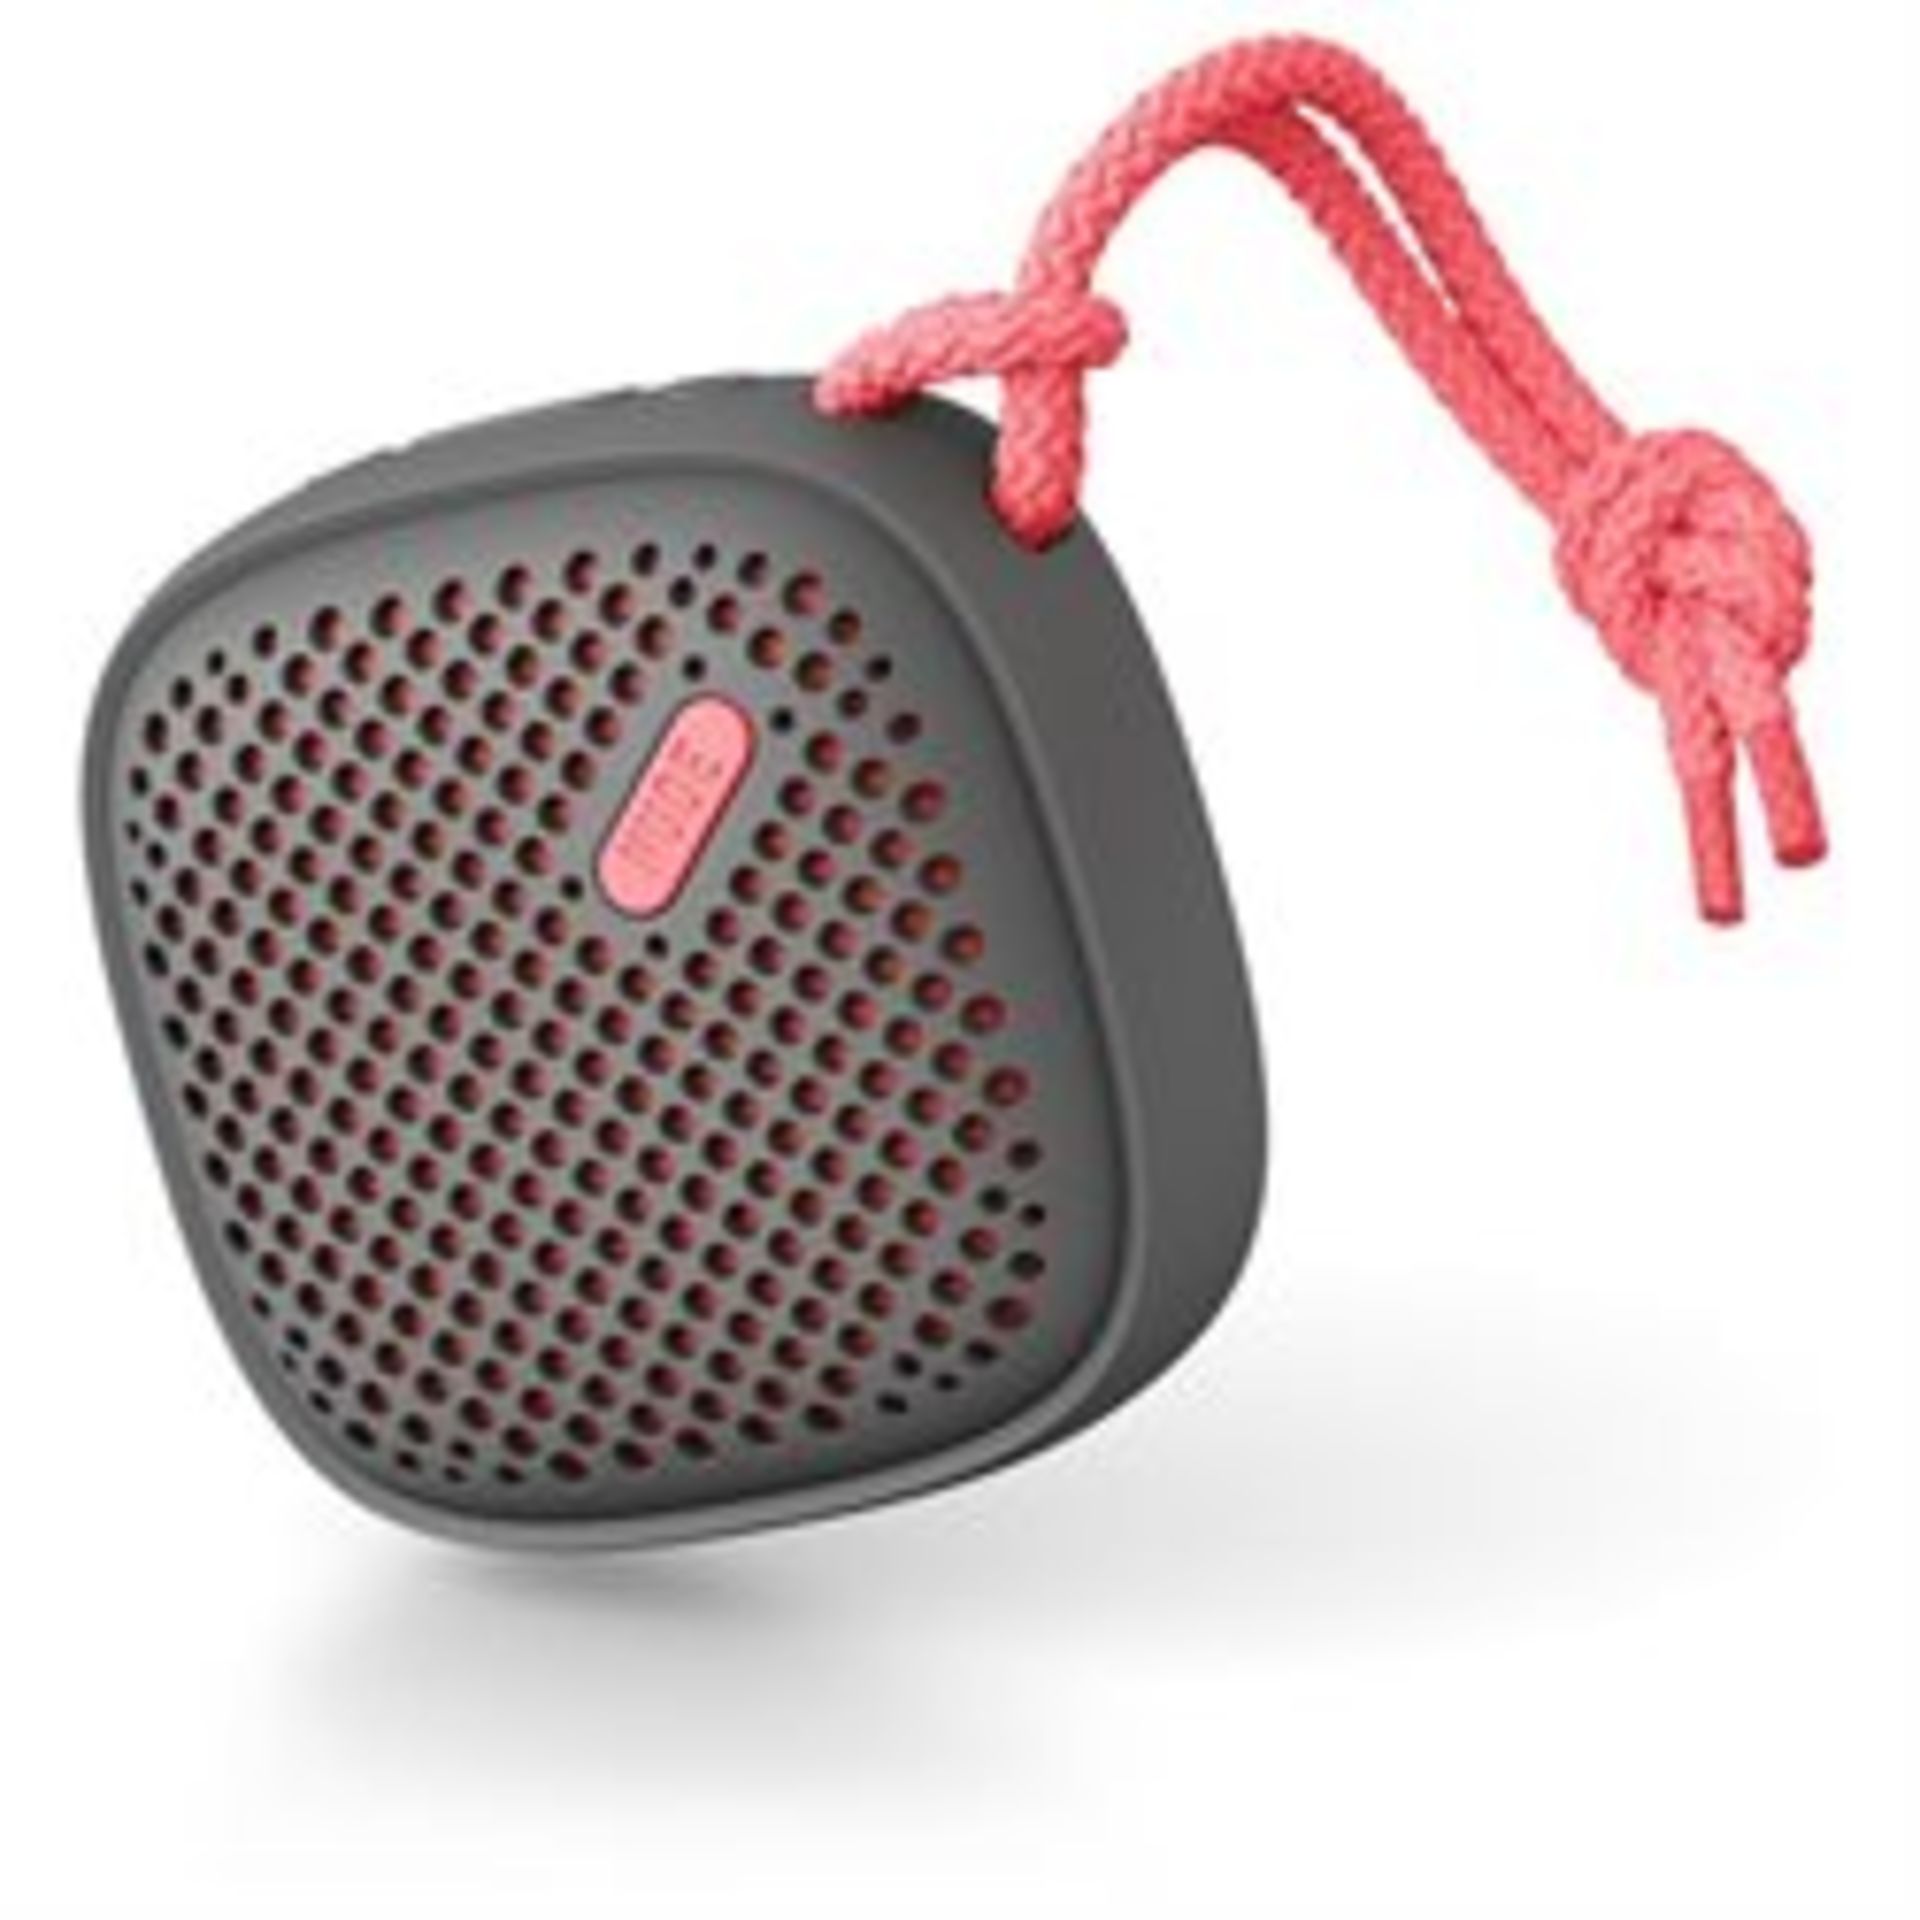 V *TRADE QTY* Brand New NudeAudio Move S Universal Portable Wireless Bluetooth Speaker Charcol/Coral